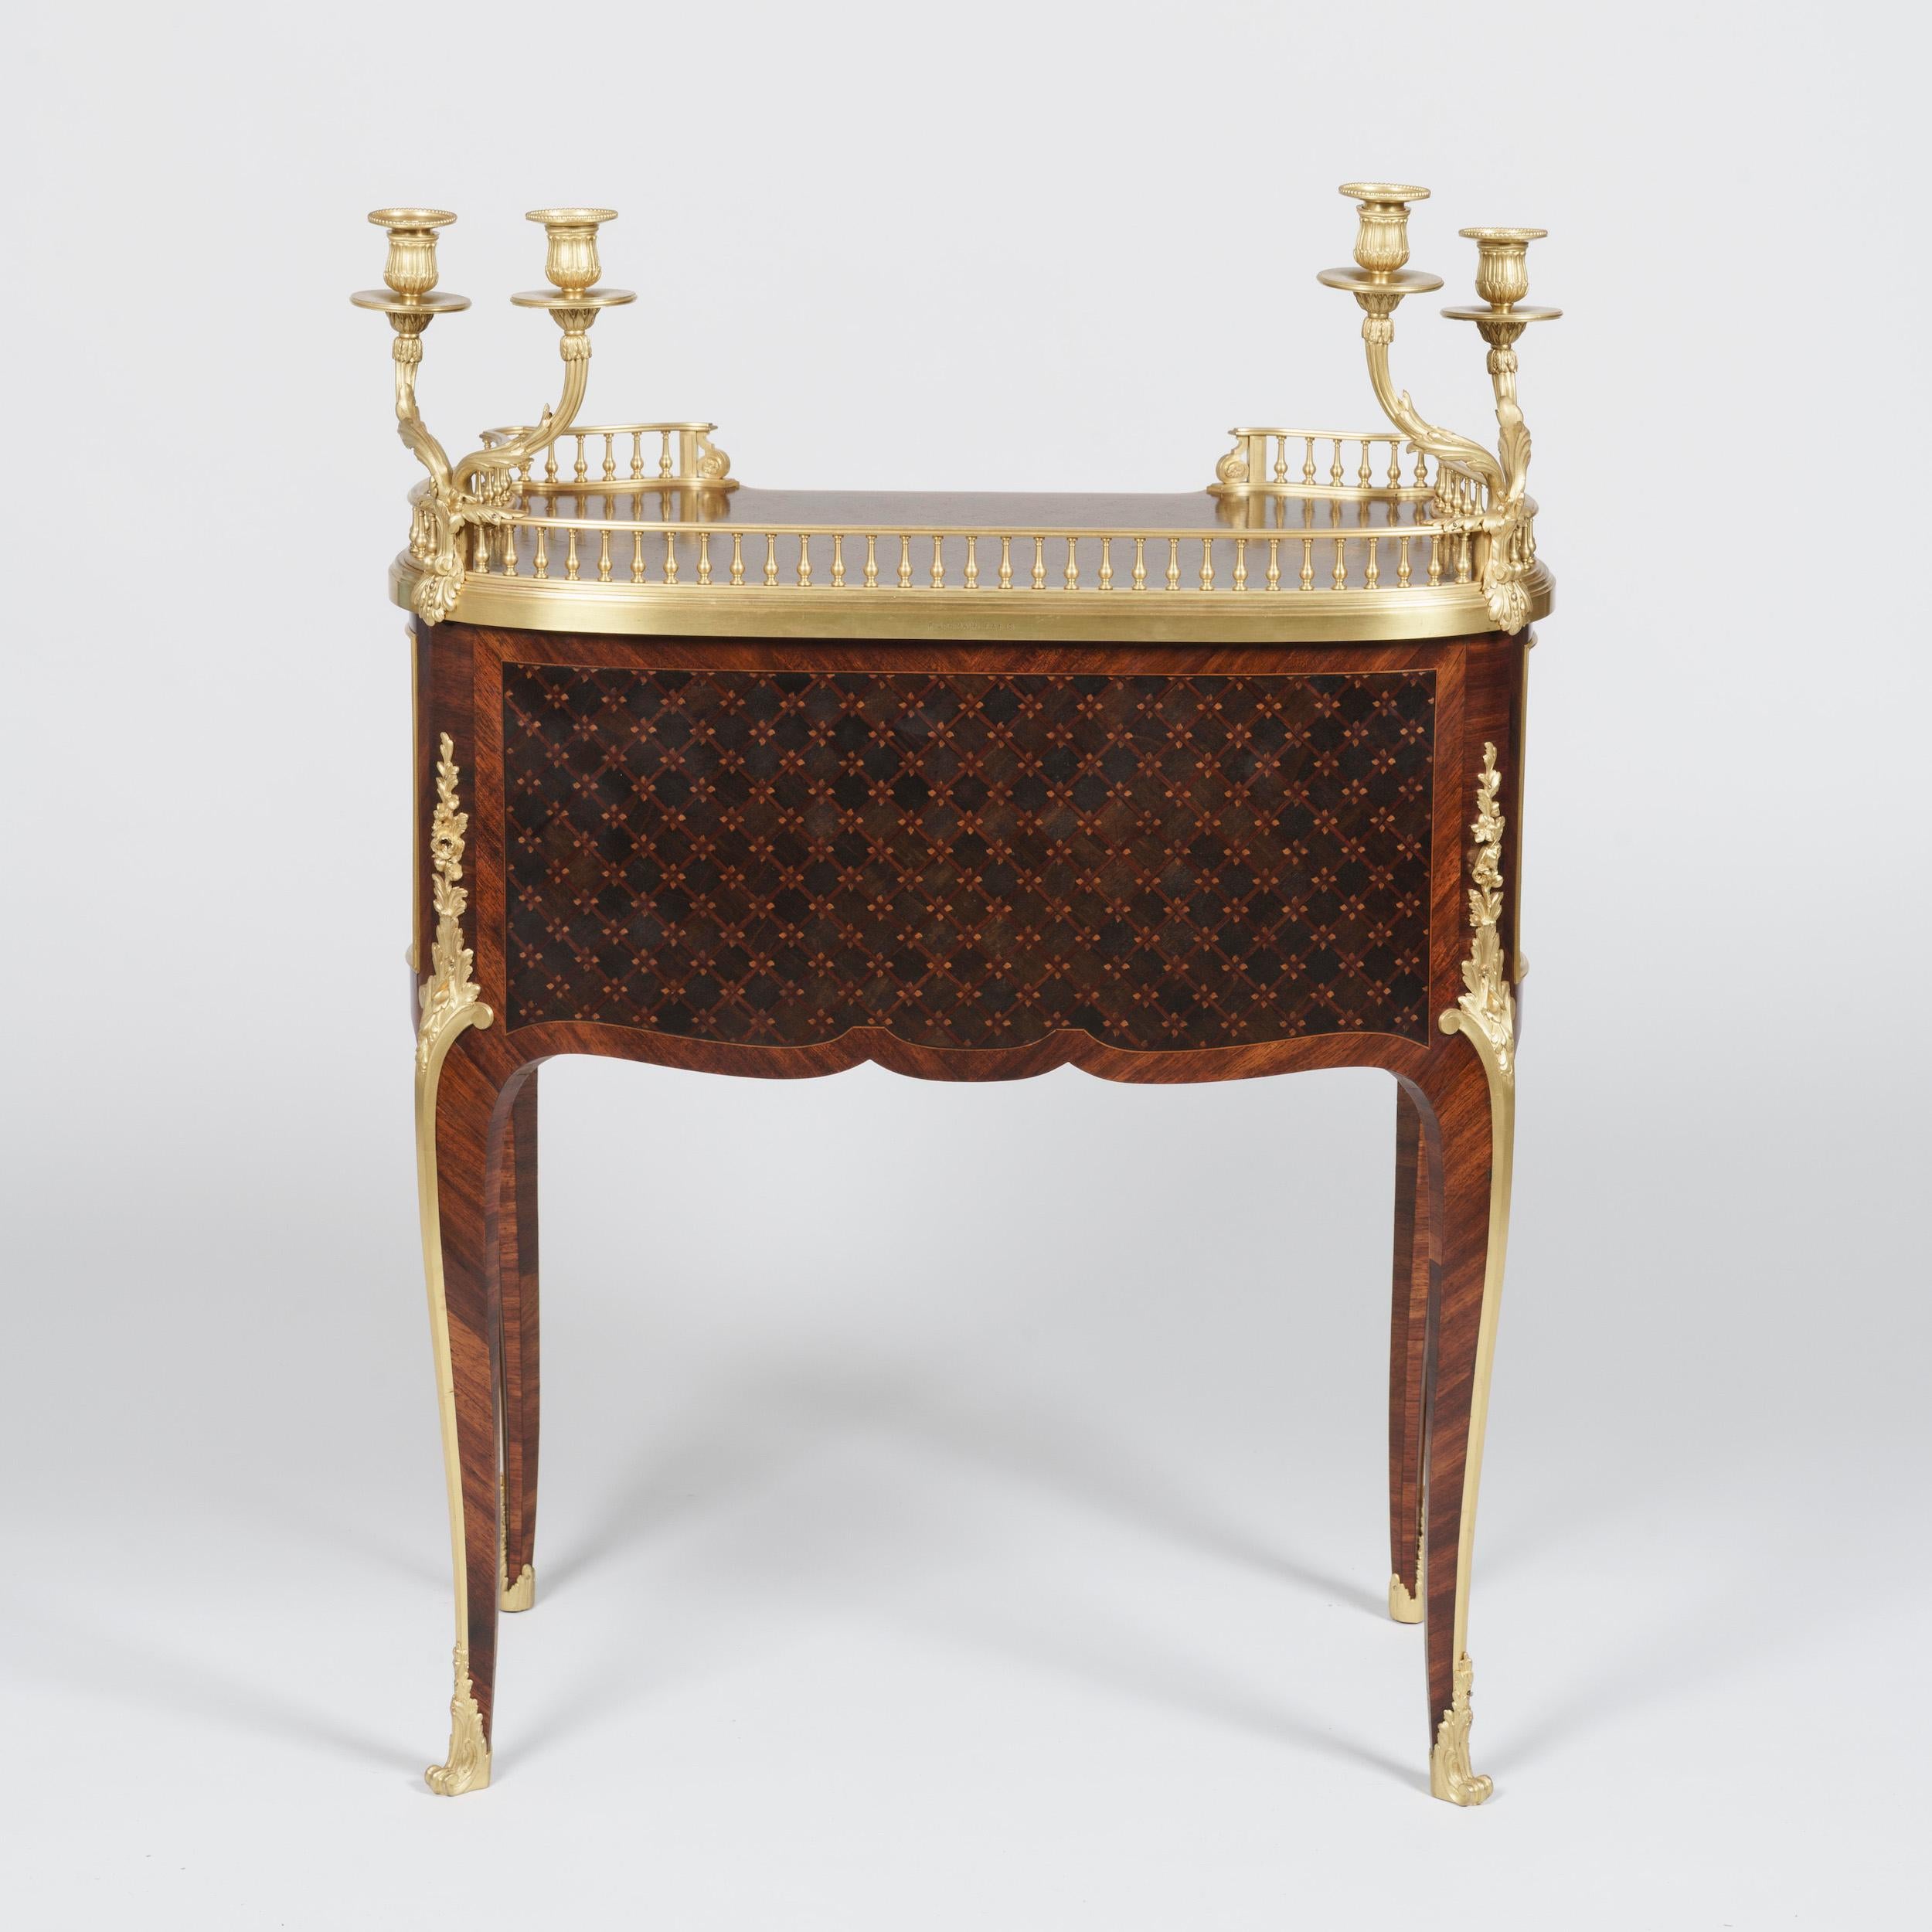 French 19th Century Ormolu-Mounted Table in the Louis XV Style by Maison Sormani For Sale